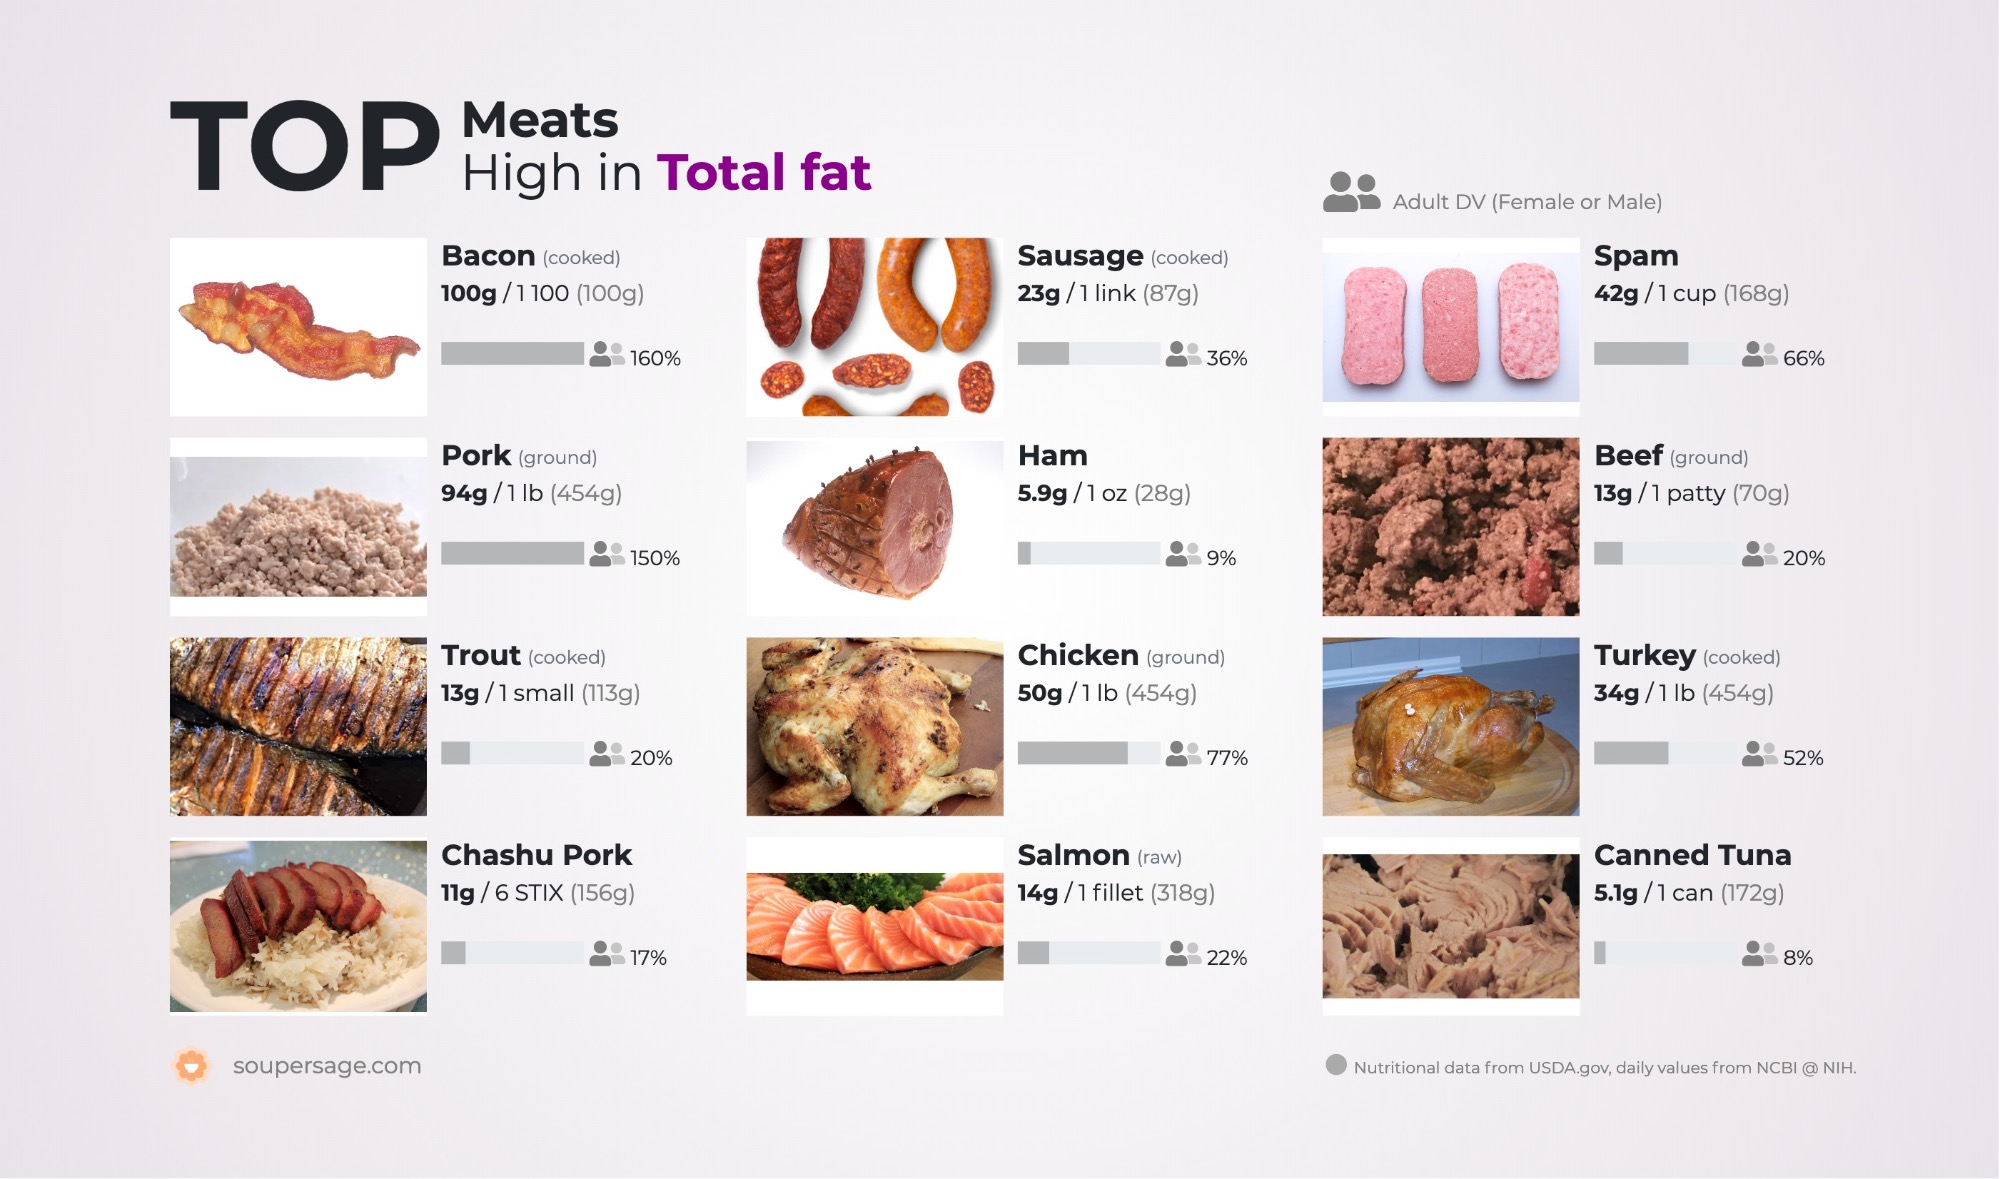 image of Top Meats High in Total fat